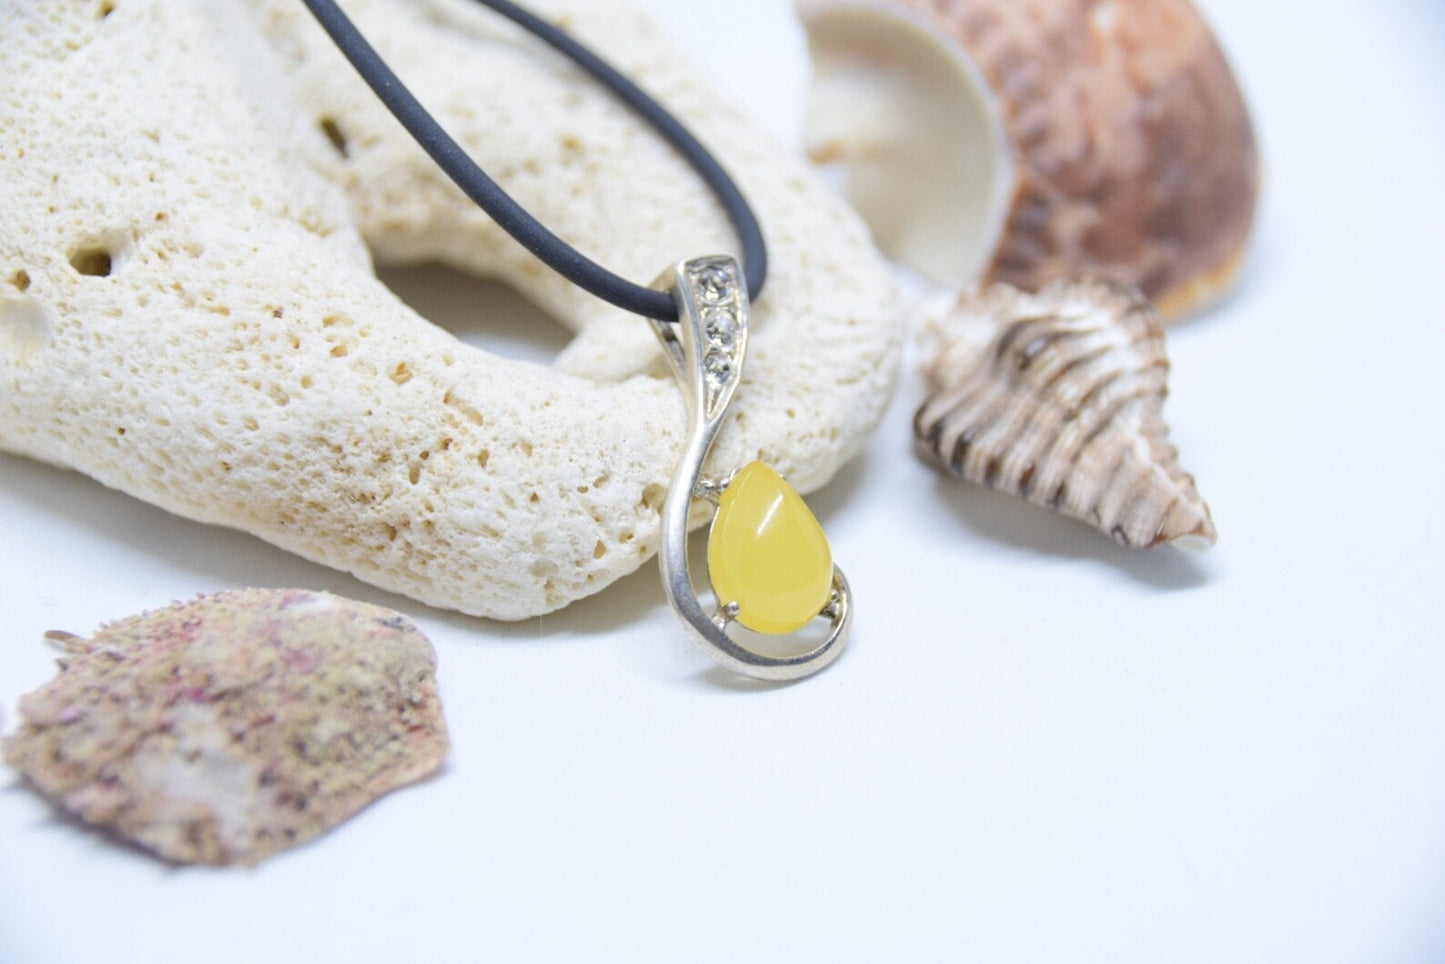 Baltic Amber and White Zirconium Silver Pendant Necklace